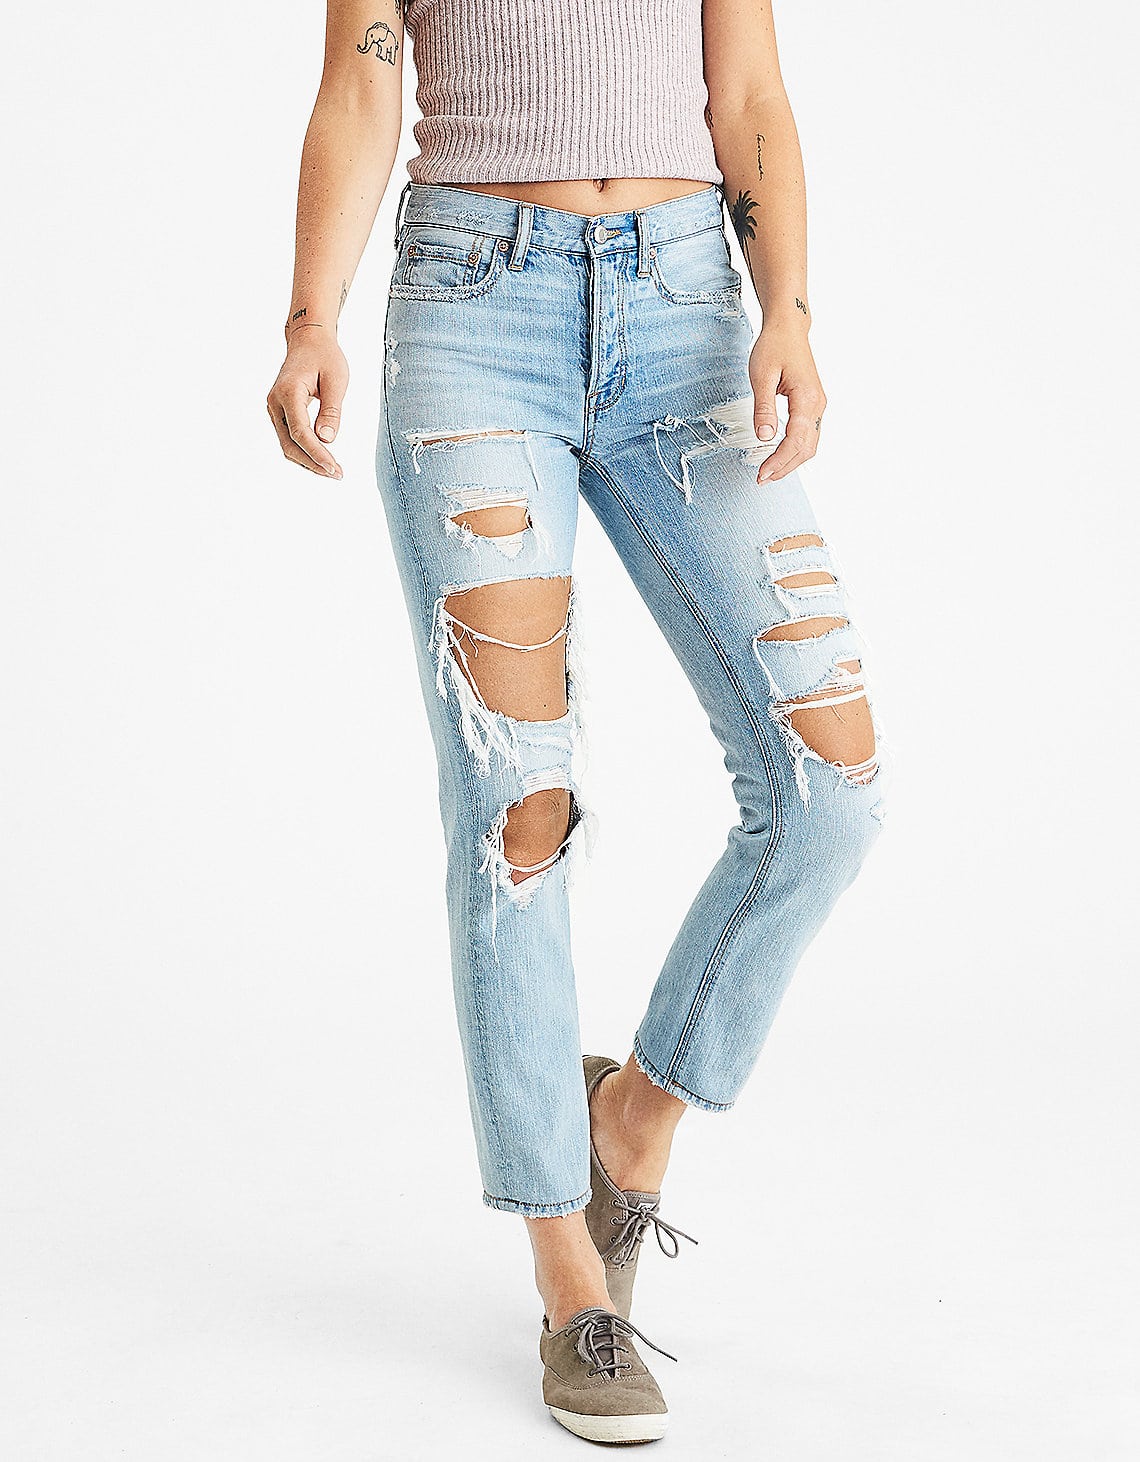 American Eagle Outfitters - Vintage Hi-Rise Jean